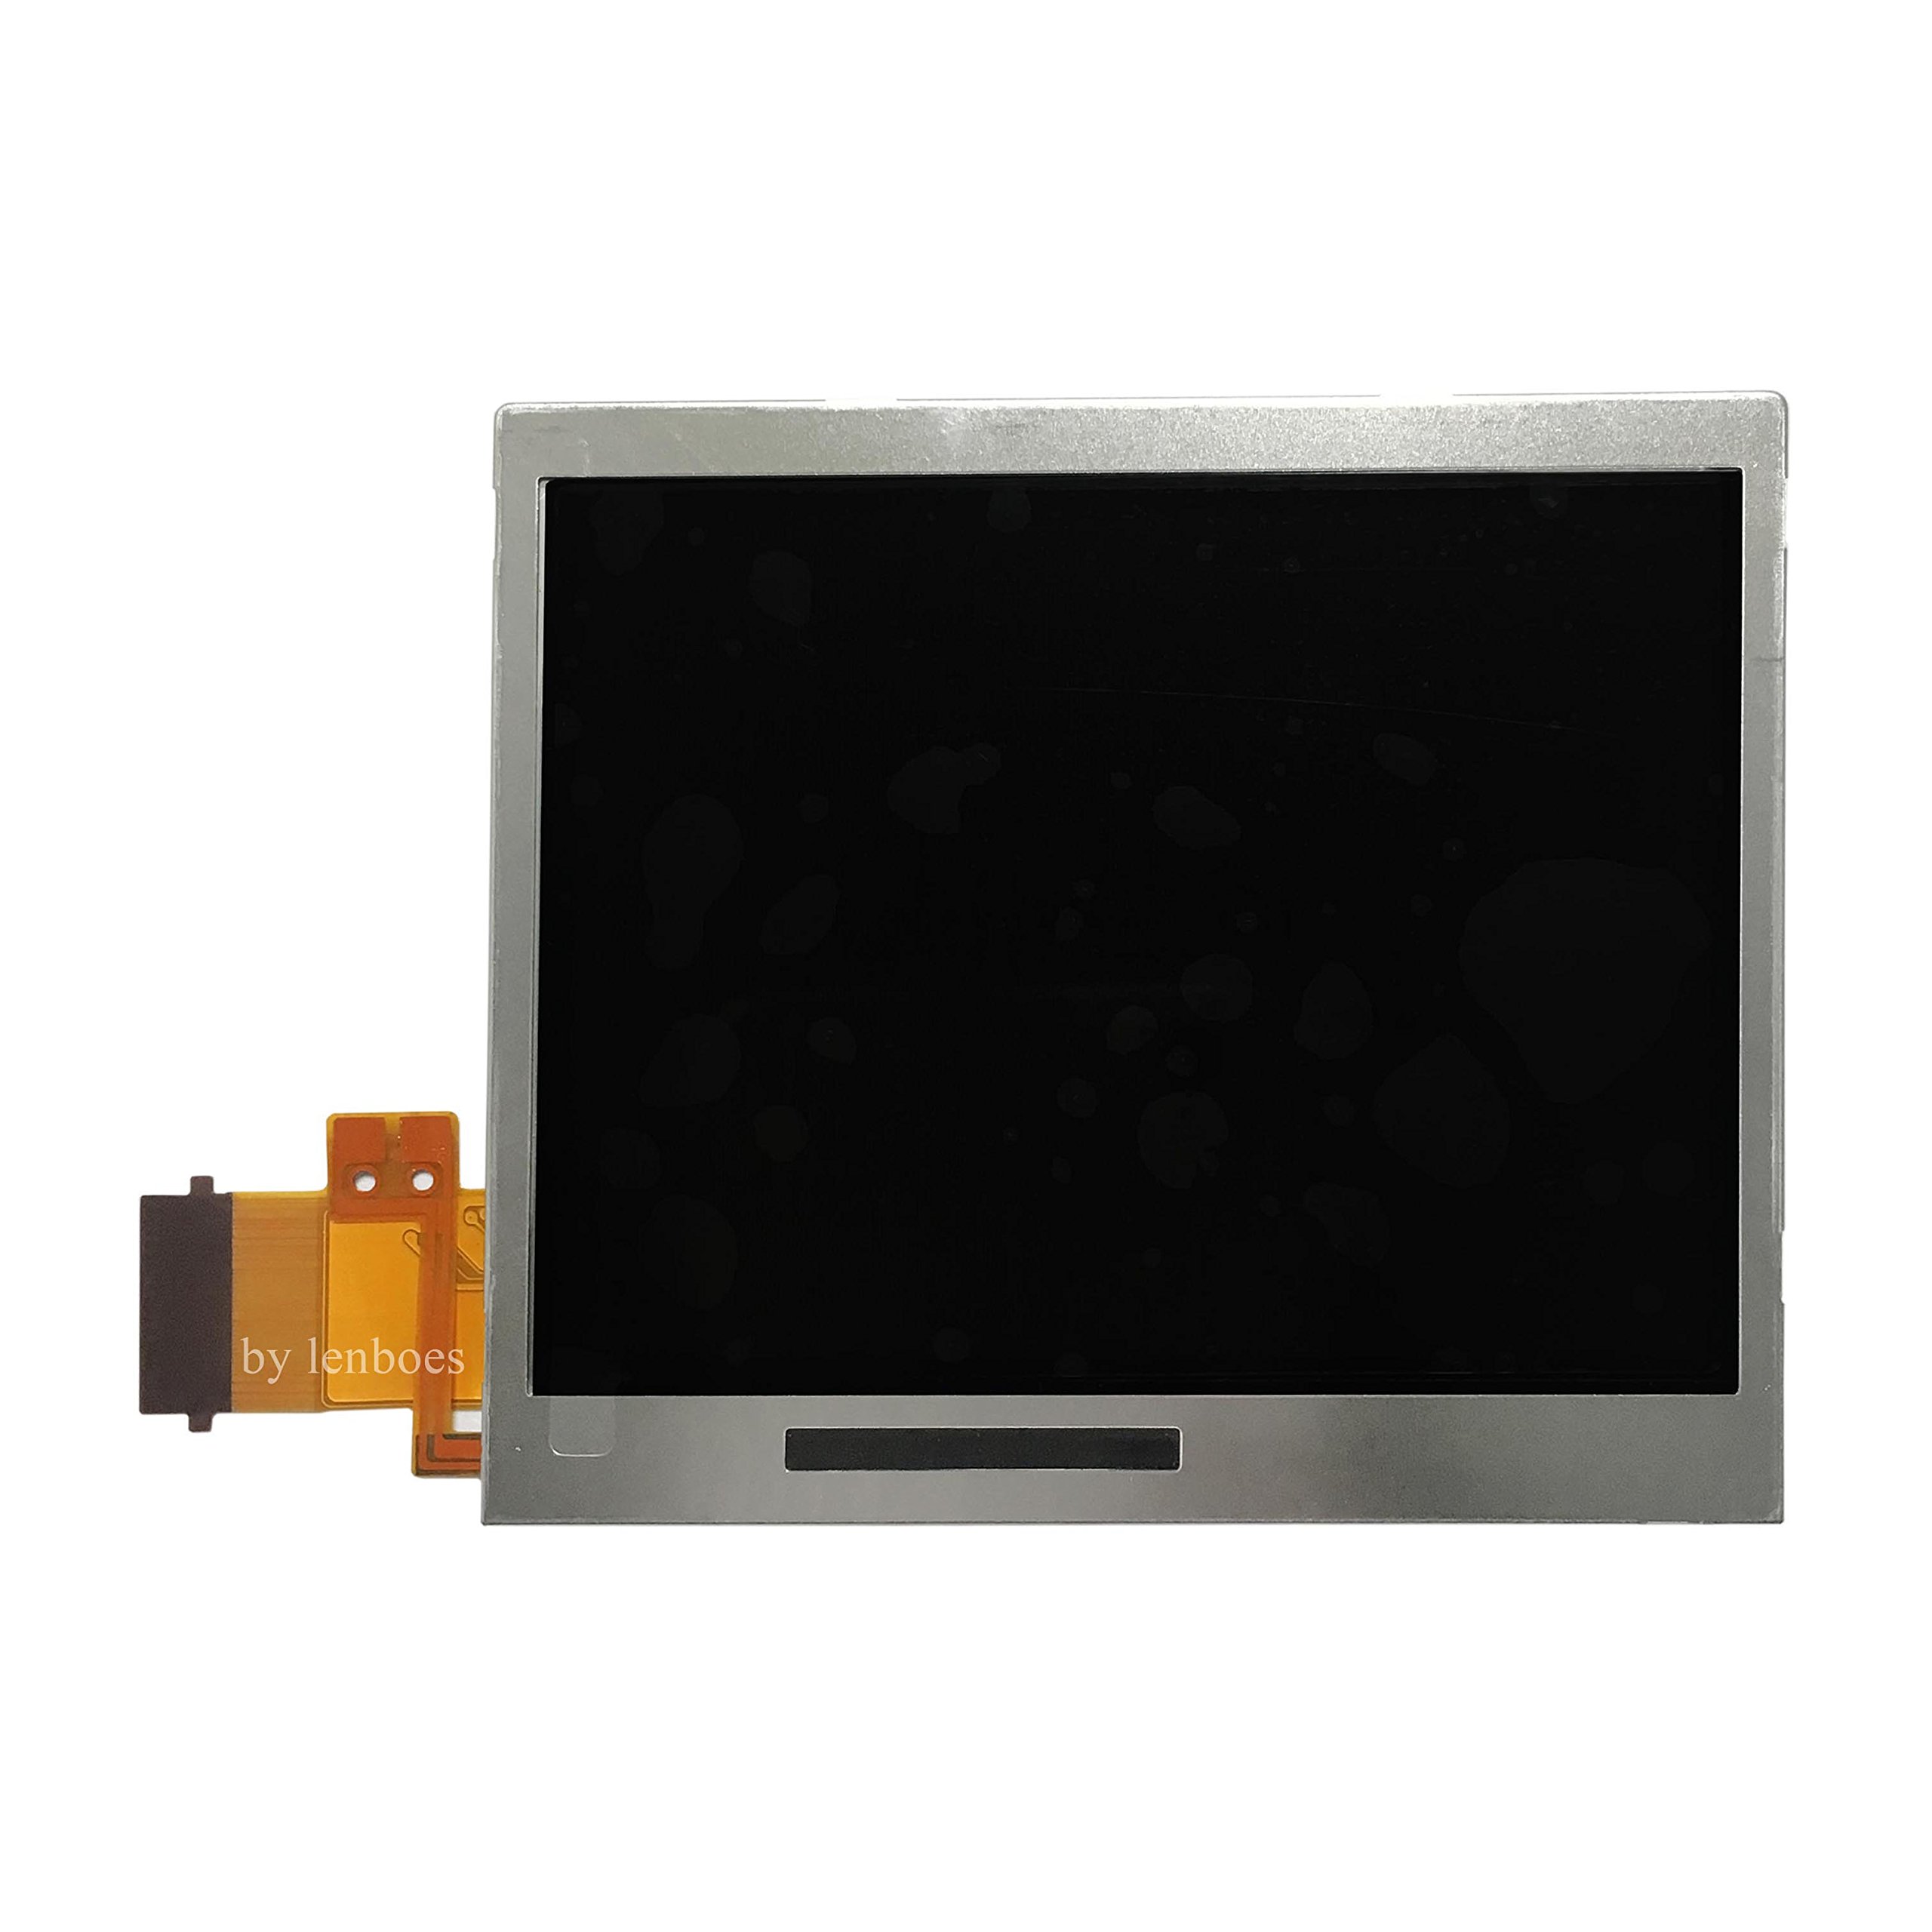 lenboes Bottom Lower LCD Screen Display Replacement for Nintendo DS Lite DSL NDSL with Opening Tool